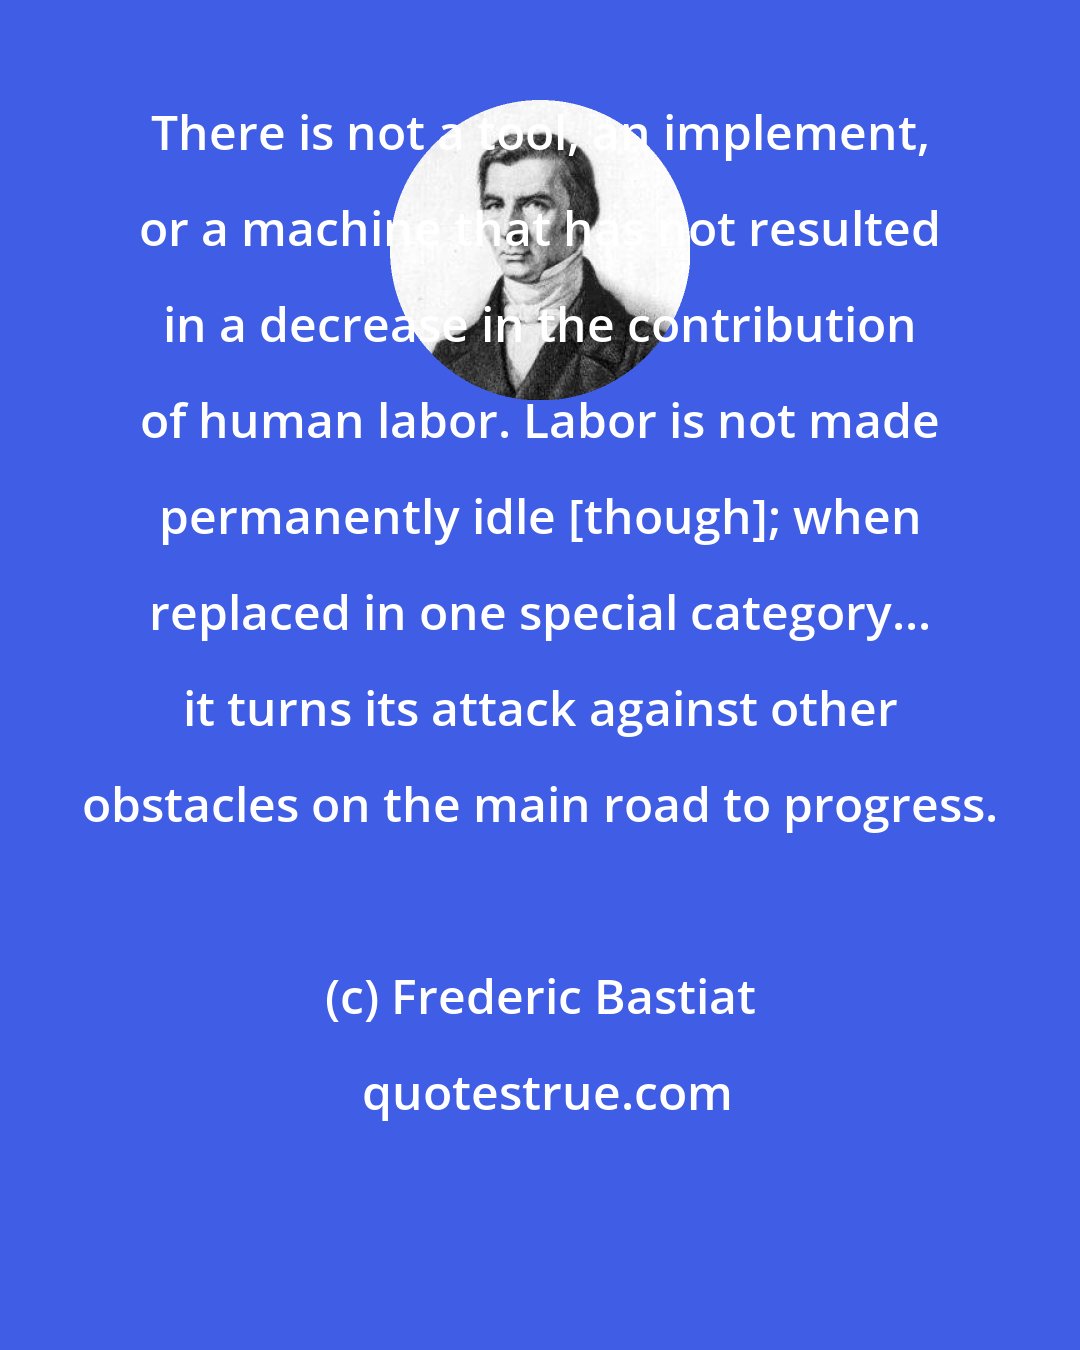 Frederic Bastiat: There is not a tool, an implement, or a machine that has not resulted in a decrease in the contribution of human labor. Labor is not made permanently idle [though]; when replaced in one special category... it turns its attack against other obstacles on the main road to progress.